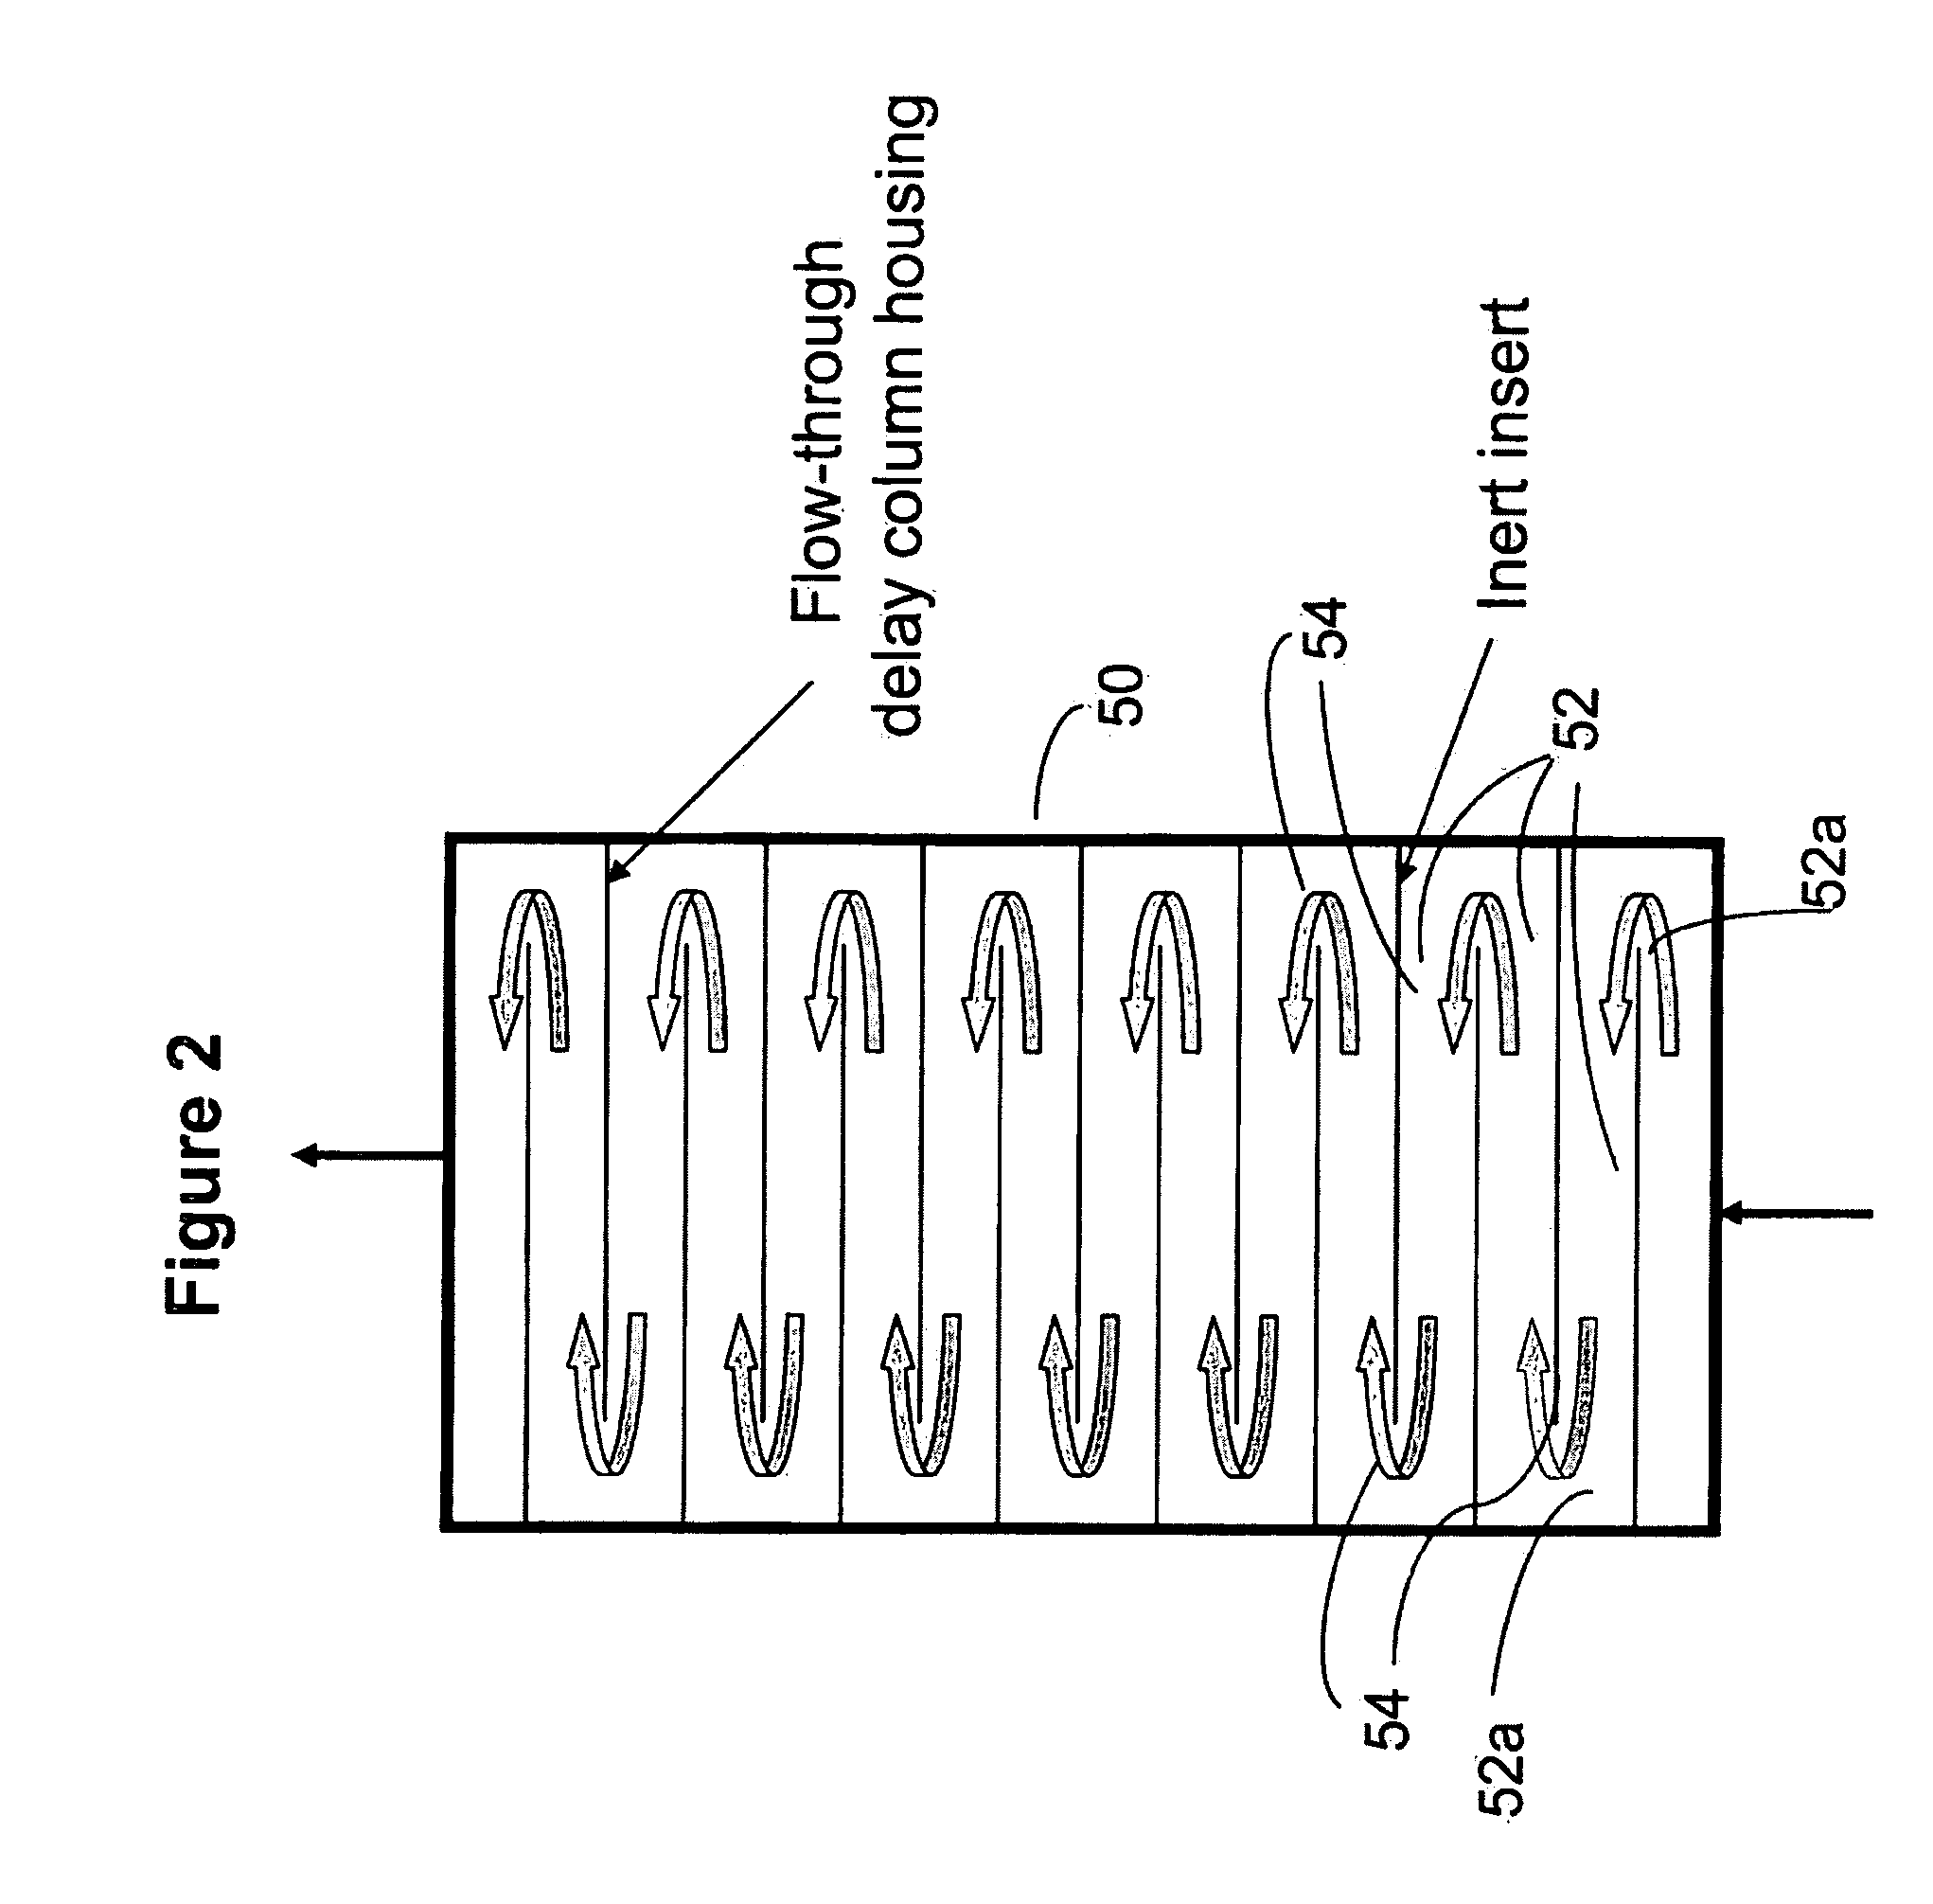 Ion chromatography system with flow-delay eluent recycle